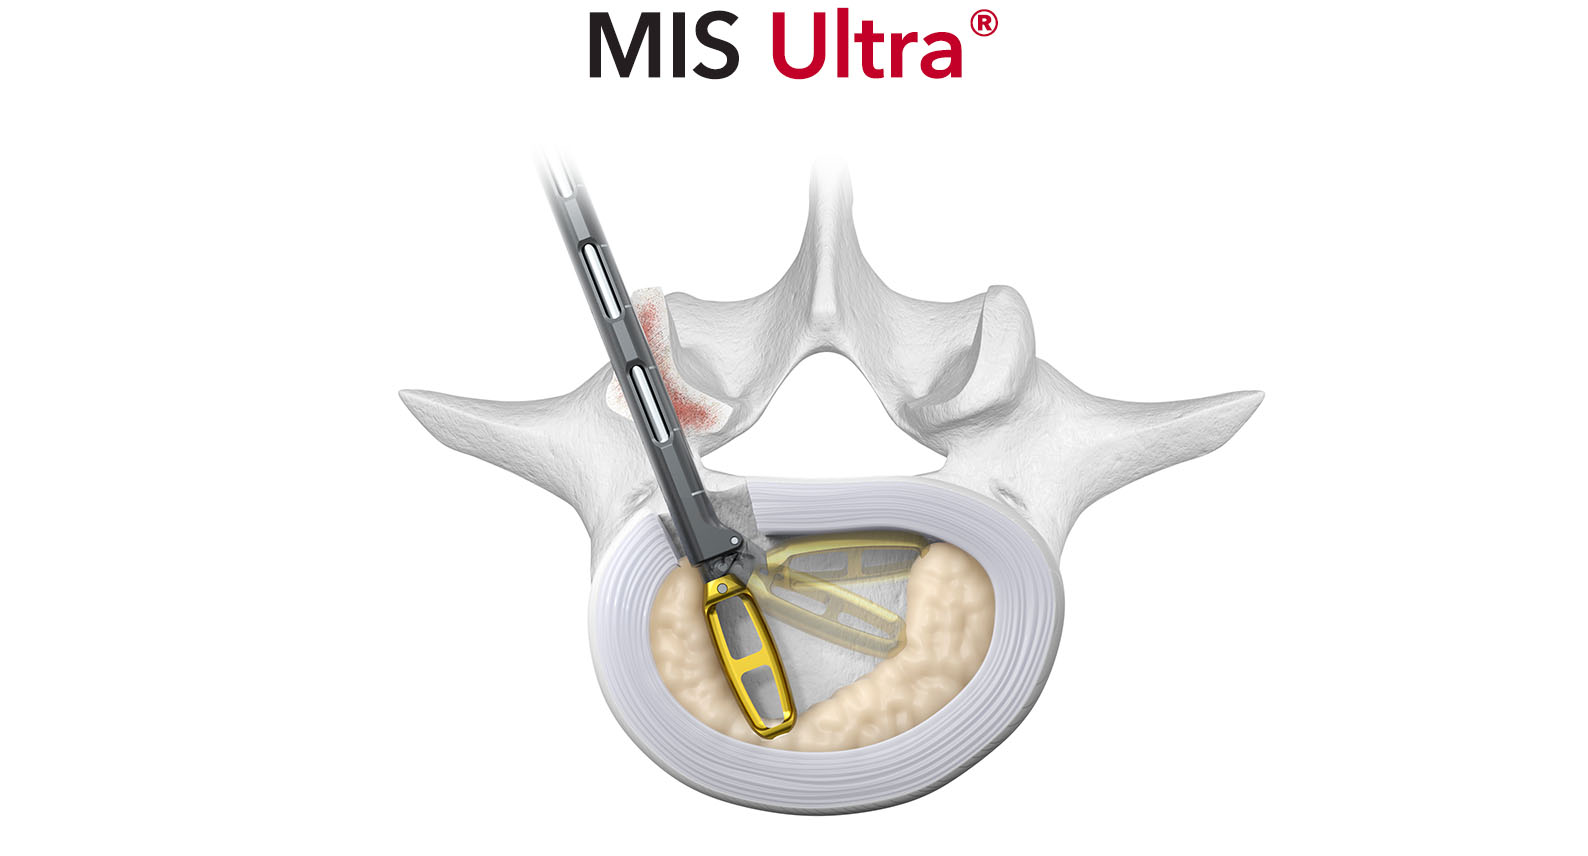 Orbit MIS Ultra Articulating Rotating Discectomy Instrument Thoracolumbar Spinal Elements